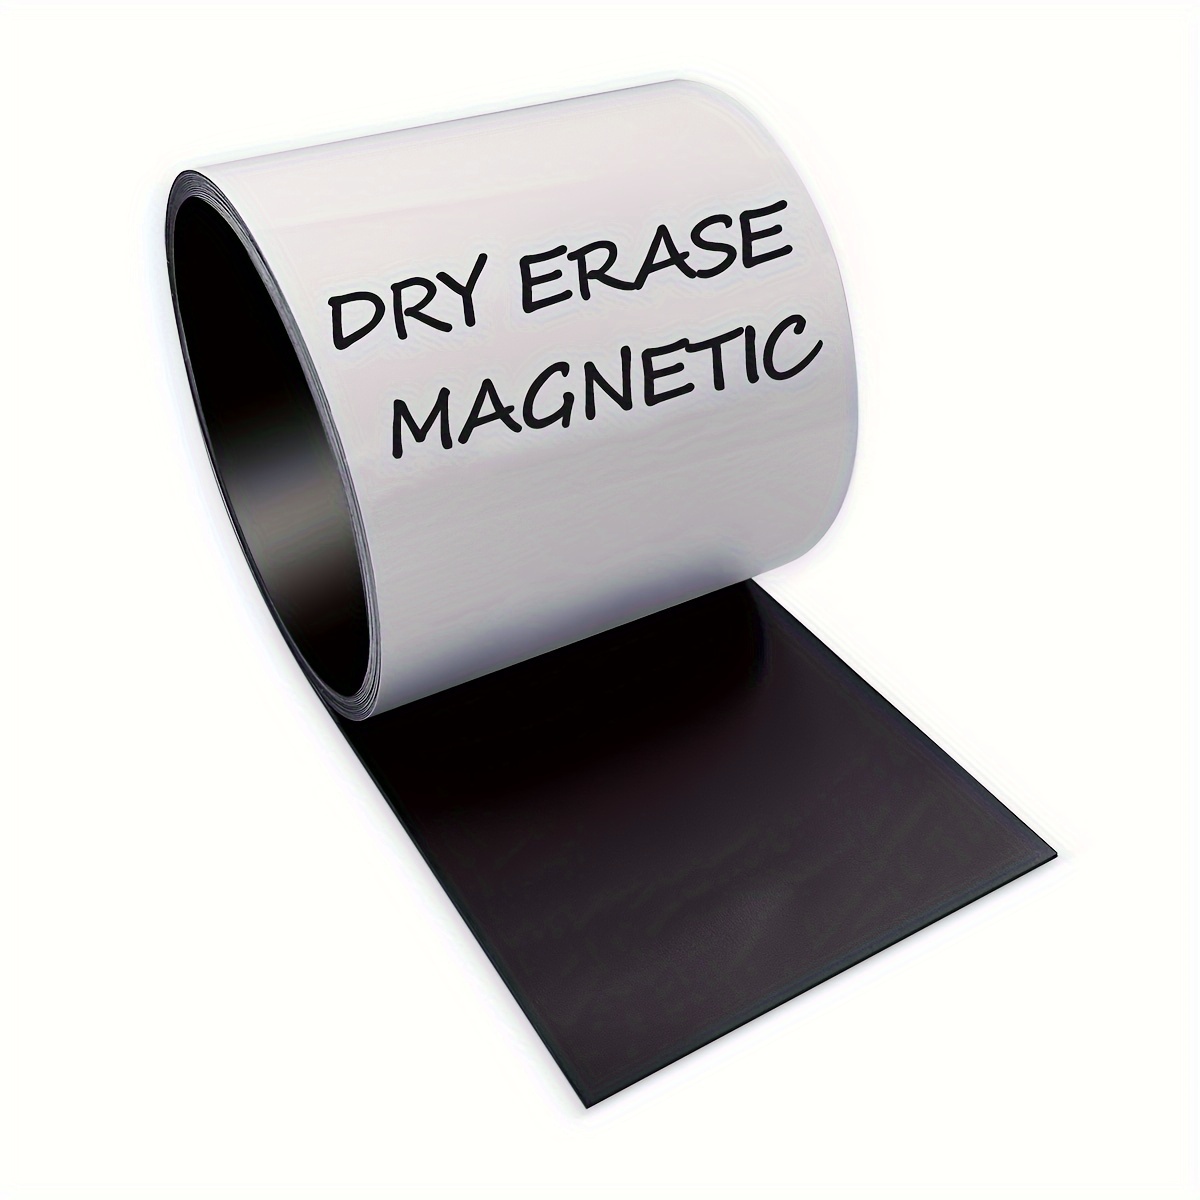 

Dry Erase Magnet Roll, Strong Magnetic Whiteboard Tape Roll, Cut Into Custom Label Strips And Sheets For Fridge Or White Board, 4 Inch Wide By 15 Foot Long